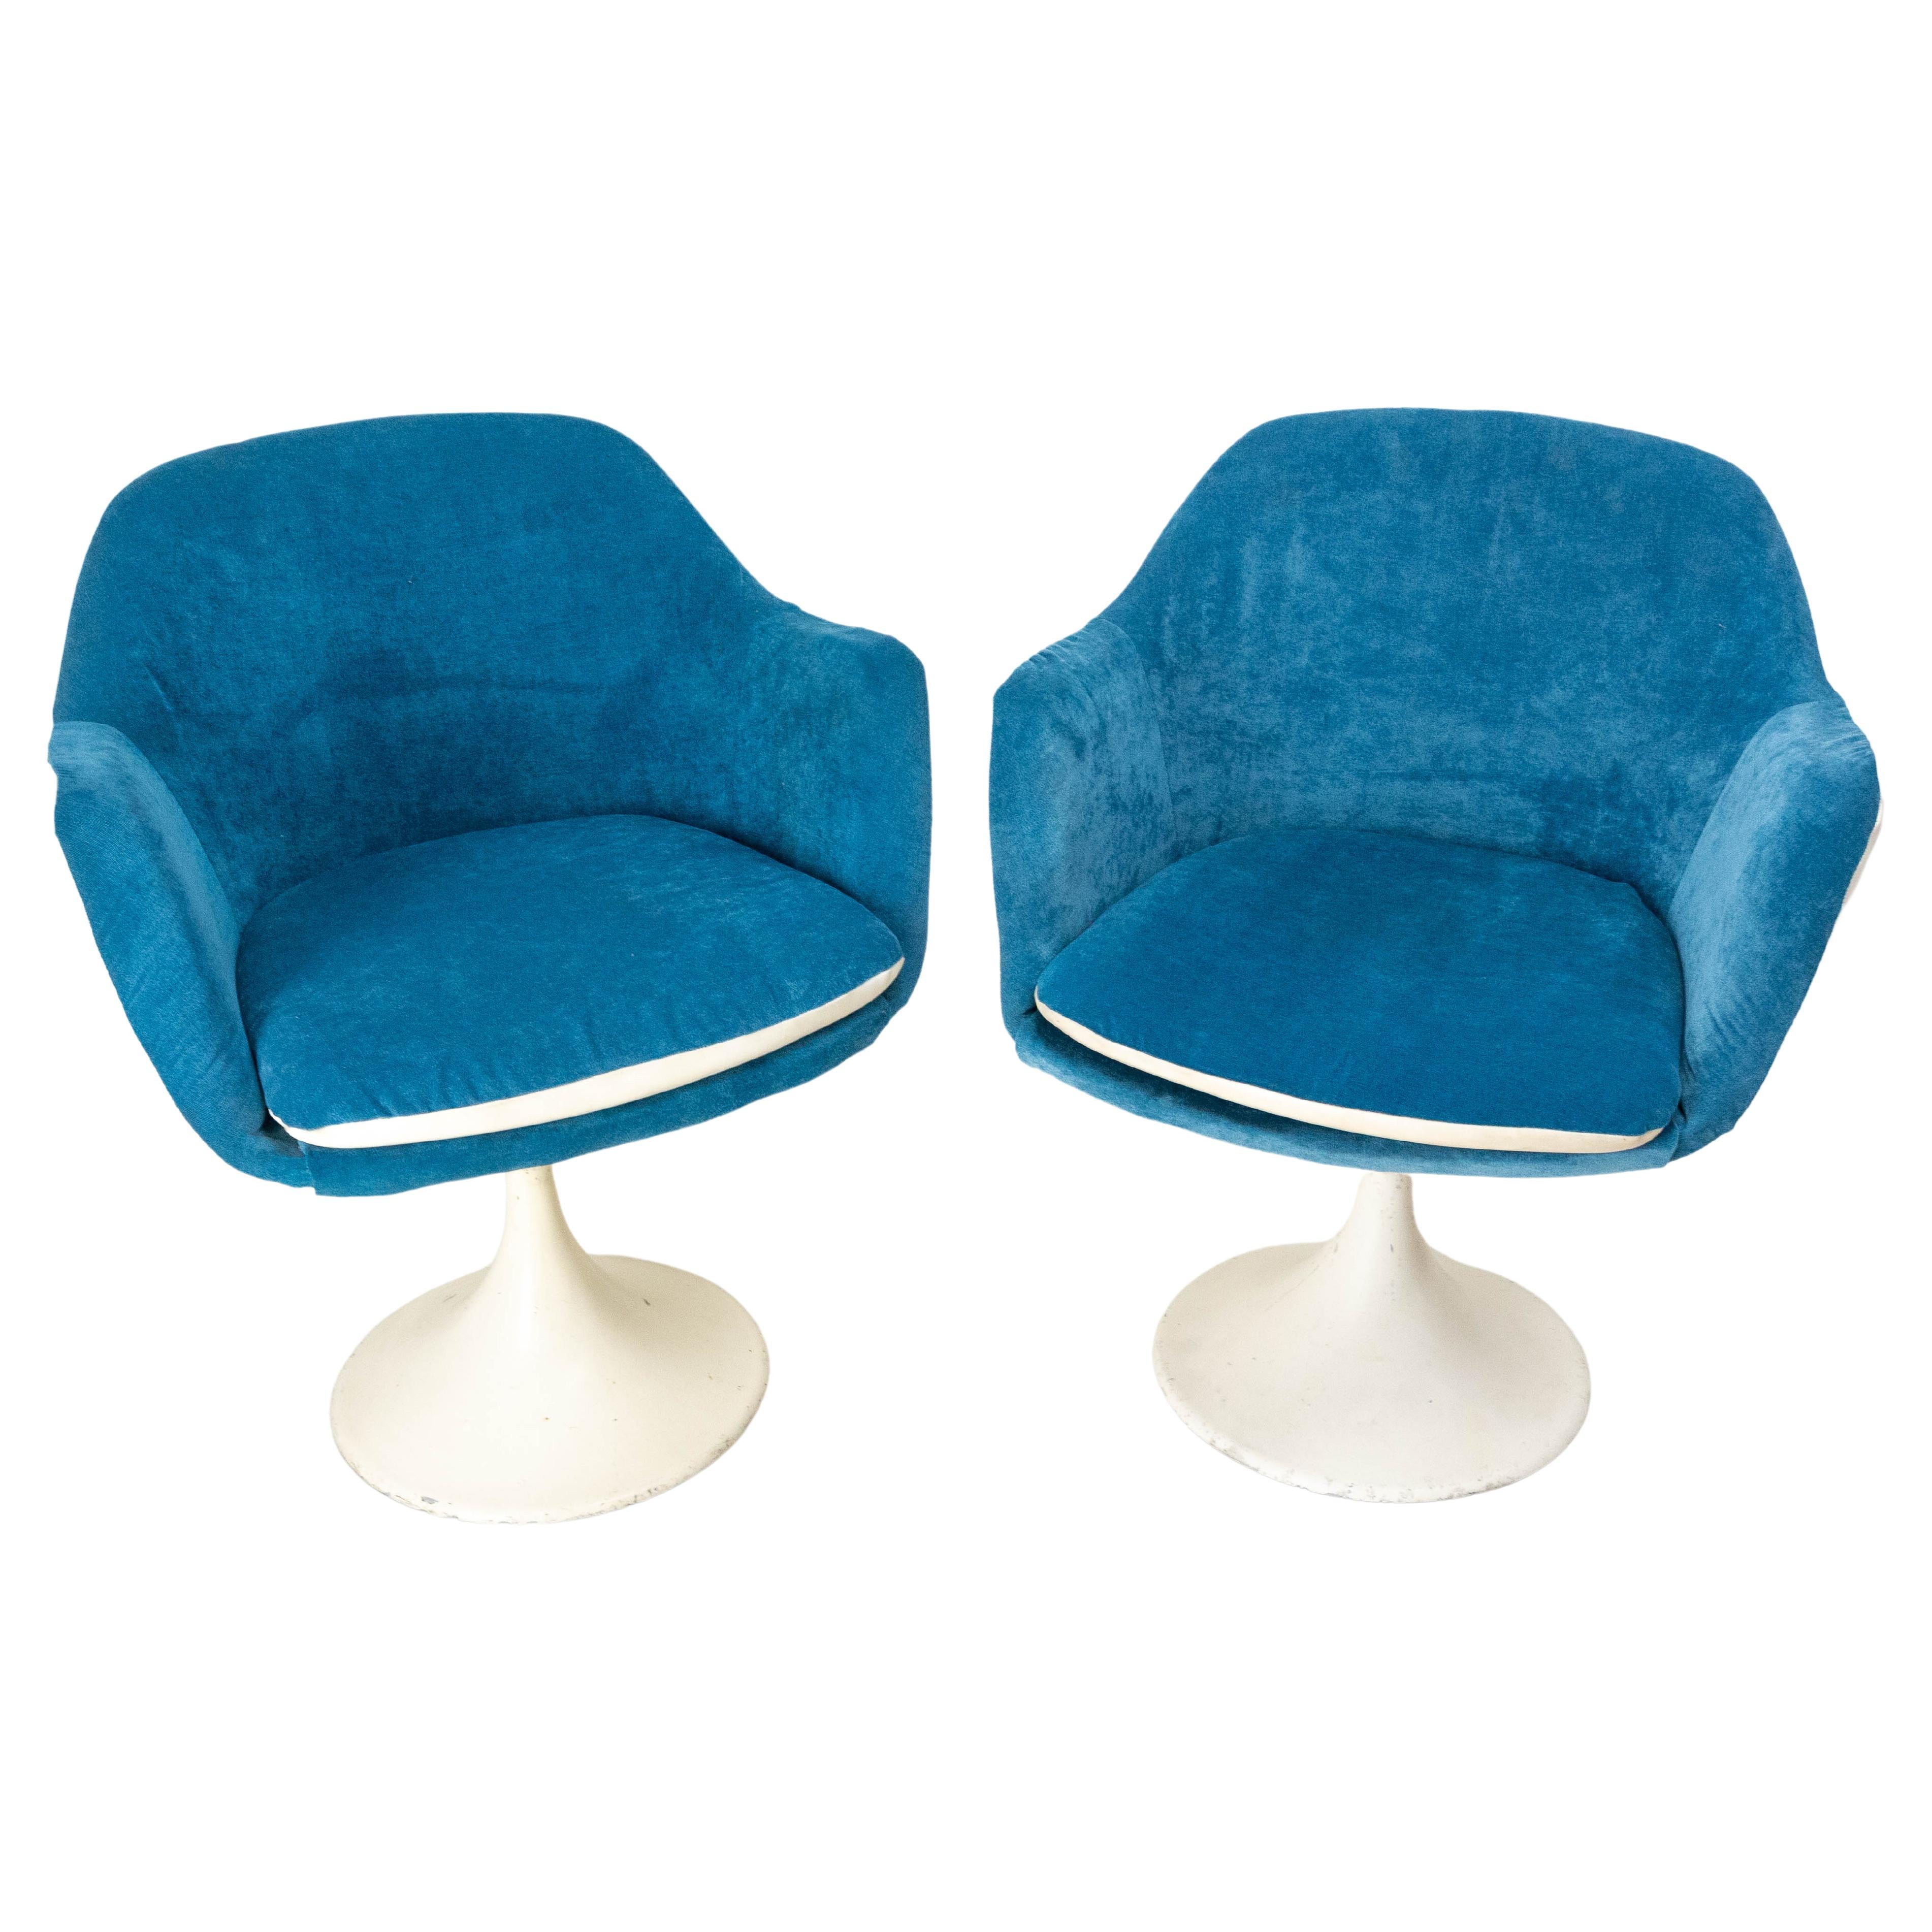 Two Midcentury French Armchairs Metal and Velvet Tulip Foot, Reupholstered